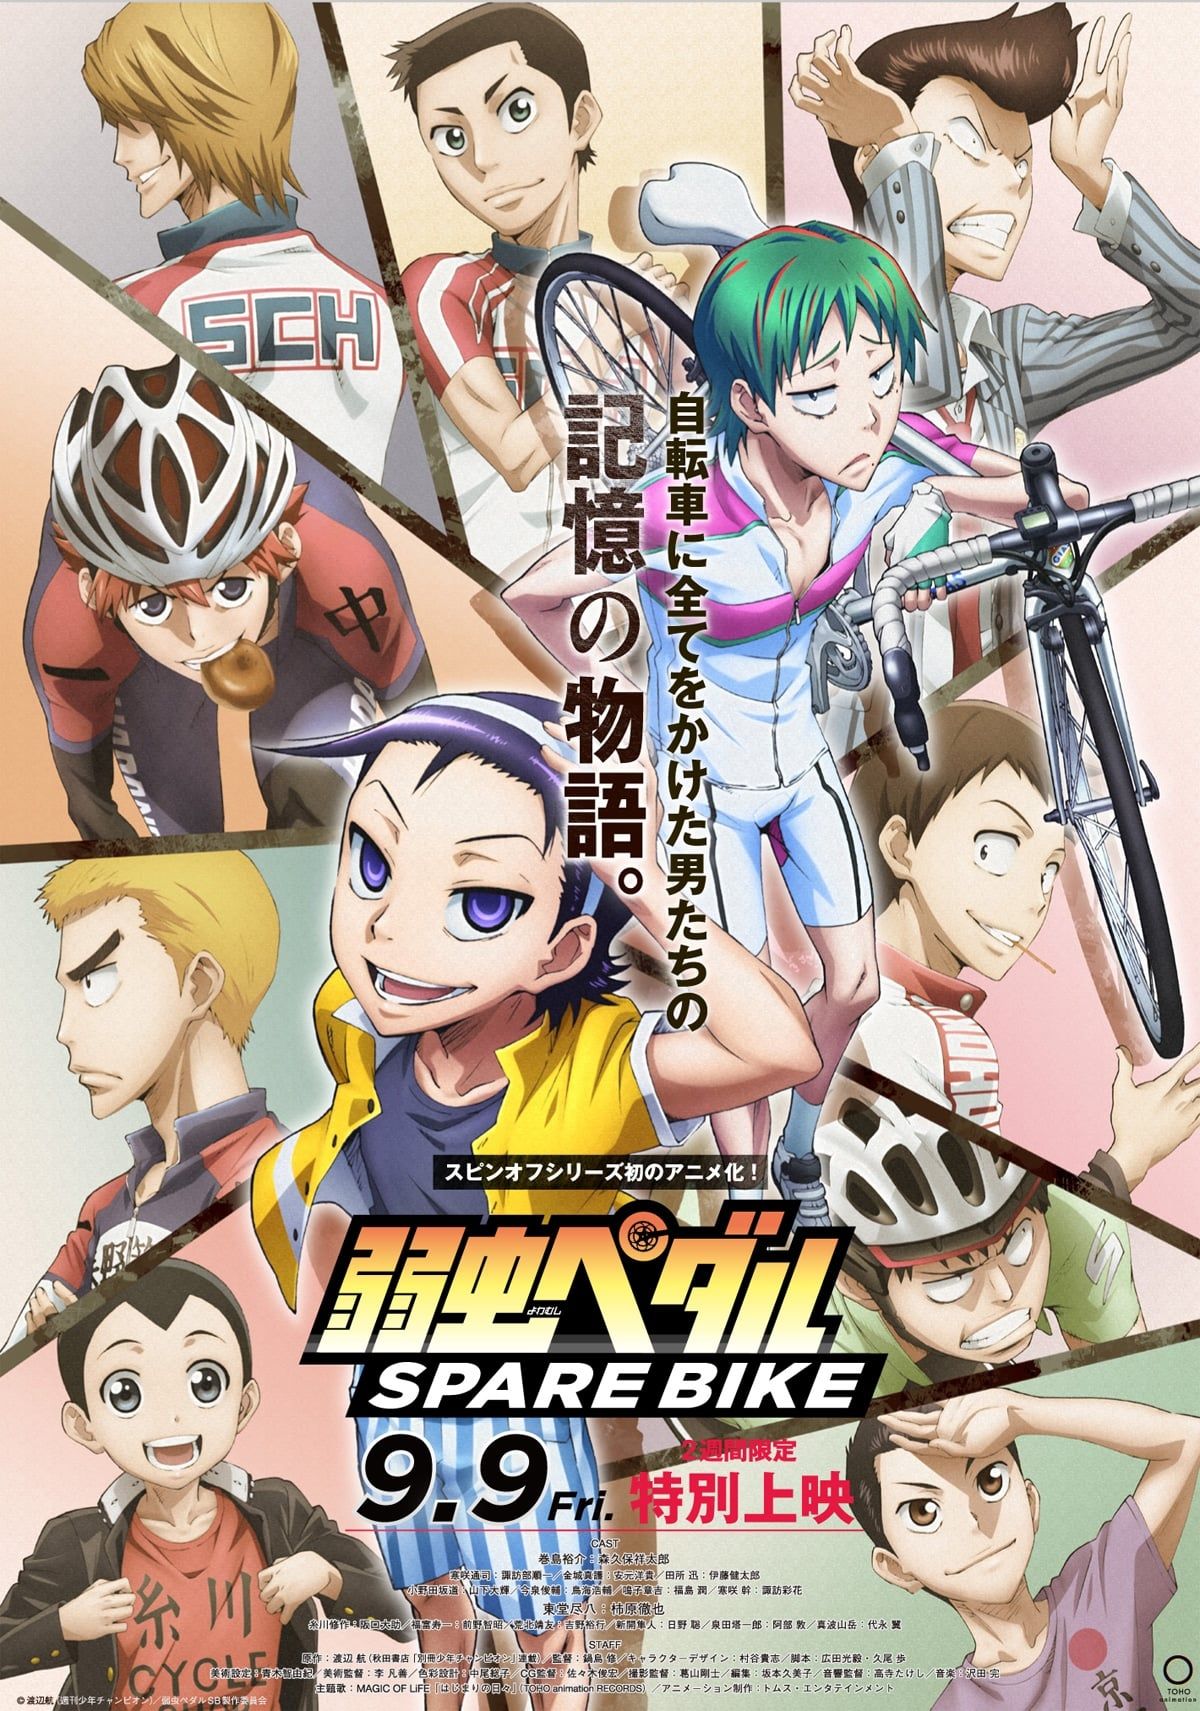 Yowamushi Pedal: LIMIT BREAK (Season 5) TV Anime – Broadcast in 2  consecutive cours with total 25 episodes : r/AnimeLeaks